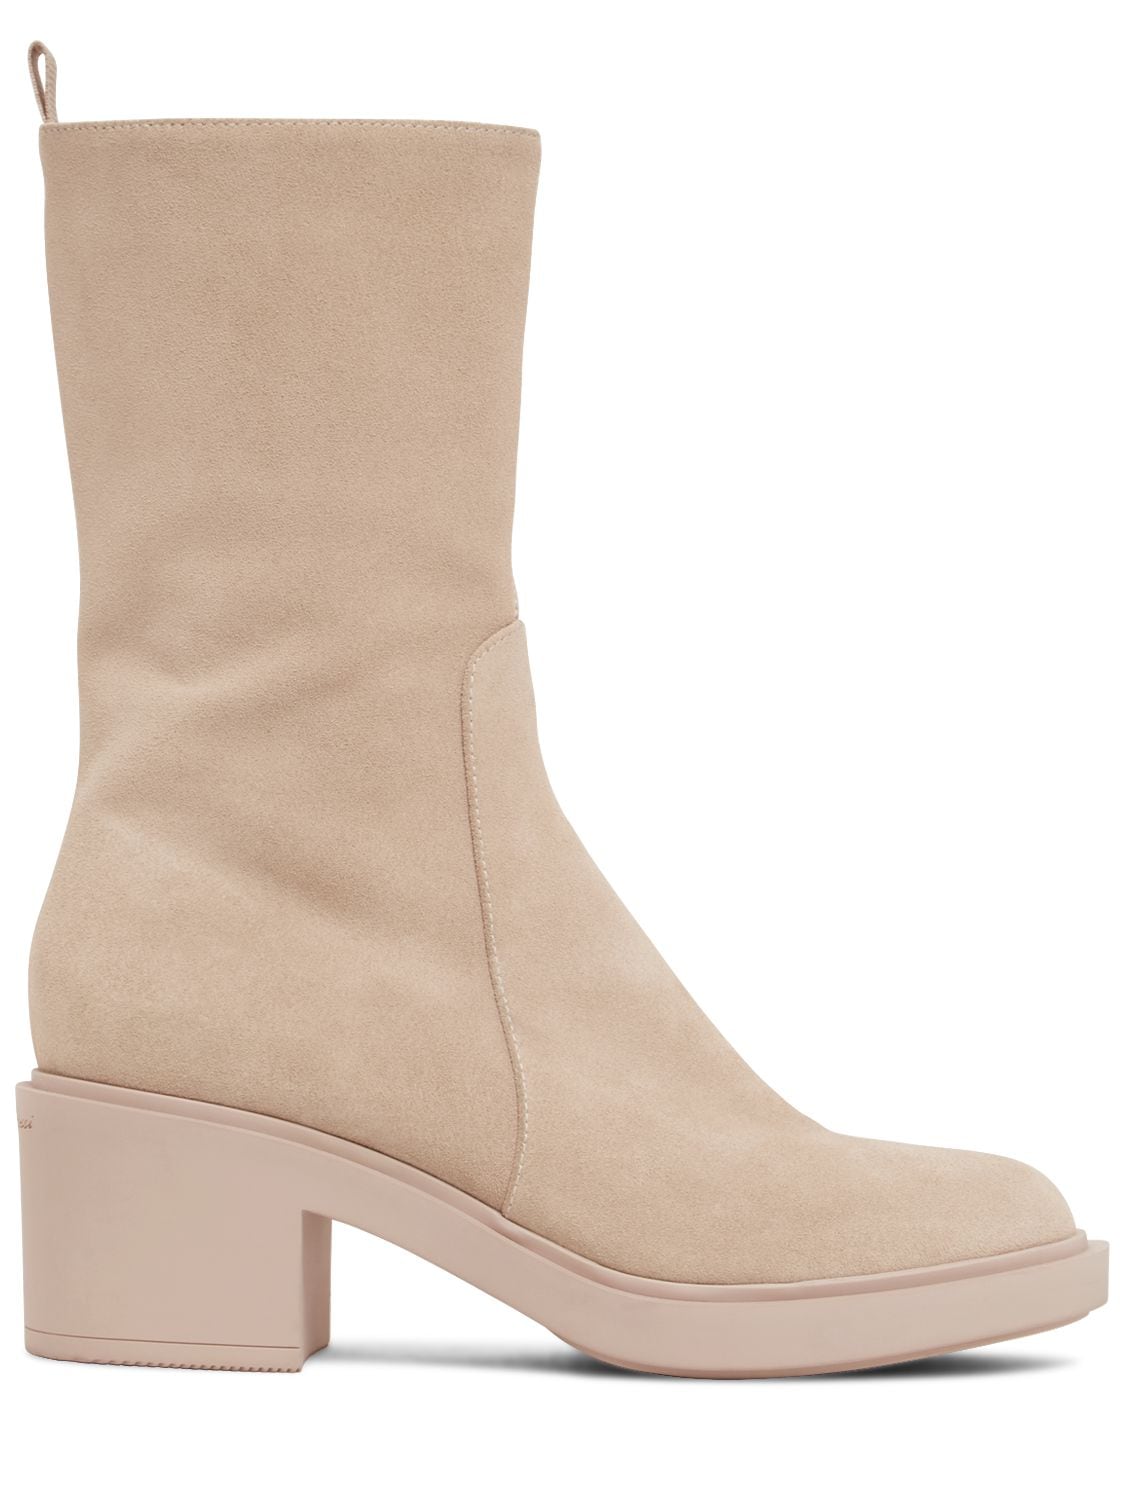 GIANVITO ROSSI 60mm Exton Suede Ankle Boots